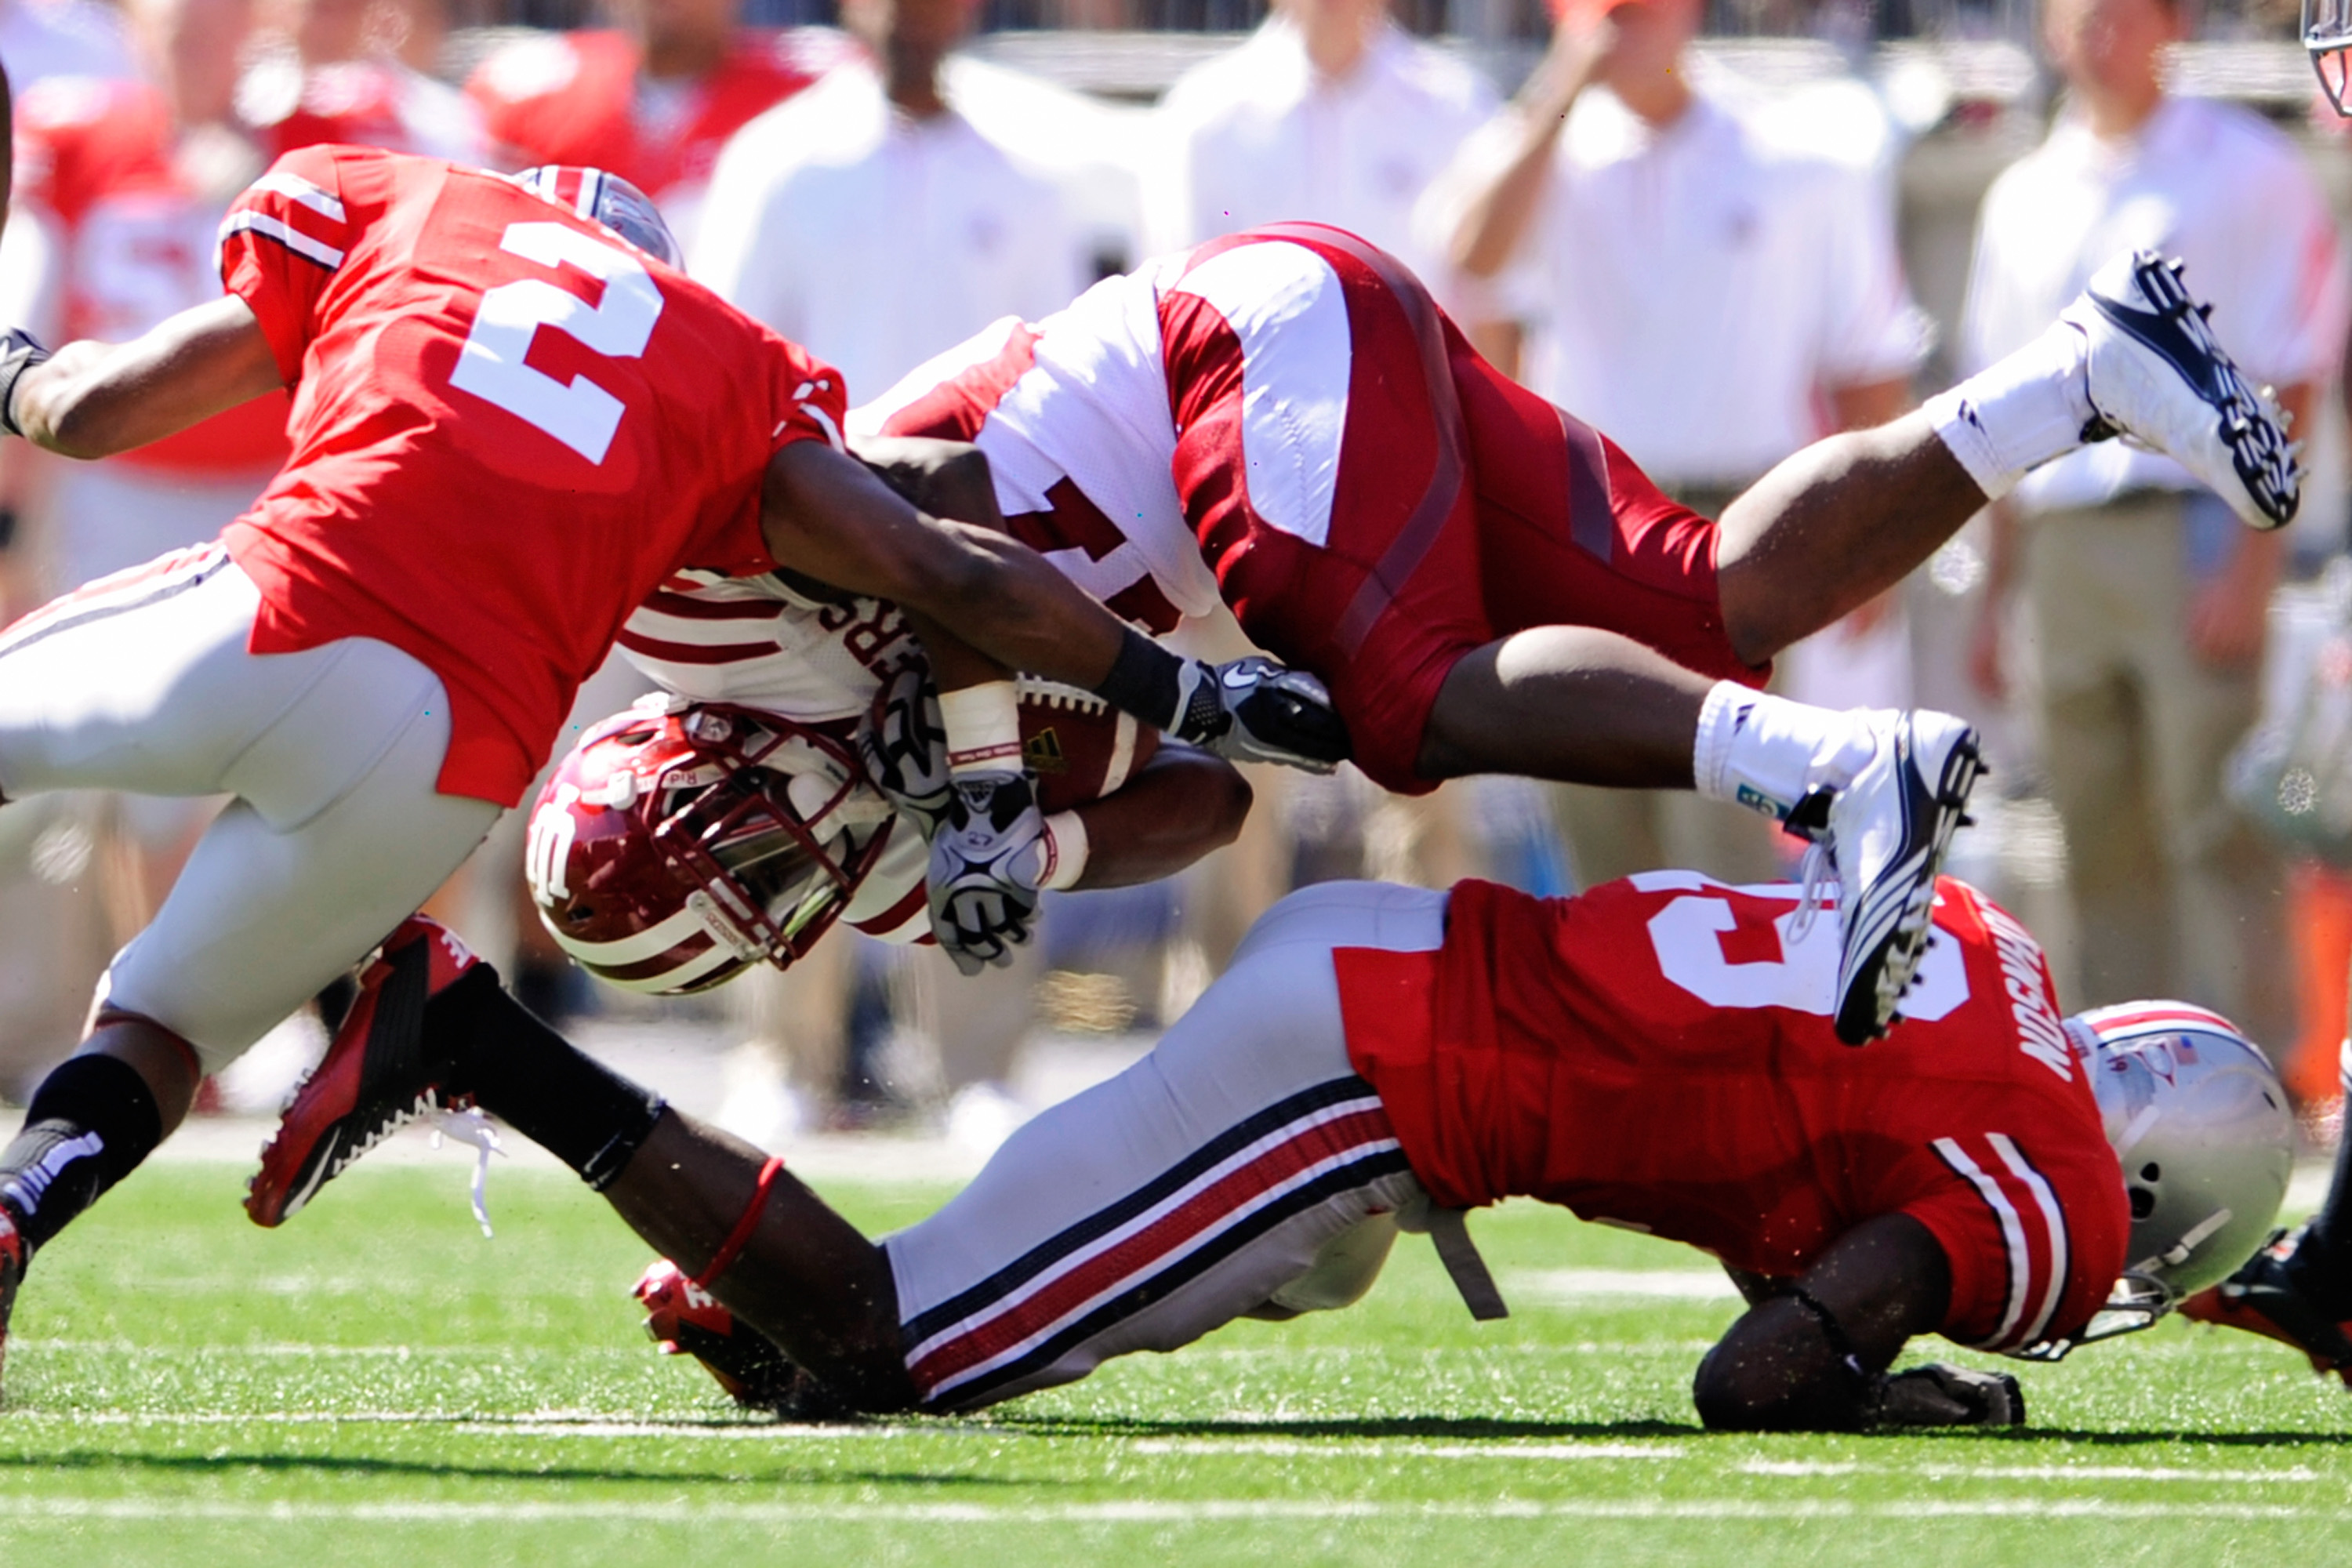 COLUMBUS, OH - OCTOBER 9:  Antonio Banks #27 of the Indiana Hoosiers is upended by Orhian Johnson #19 and Christian Bryant #2 of the Ohio State Buckeyes at Ohio Stadium on October 9, 2010 in Columbus, Ohio.  (Photo by Jamie Sabau/Getty Images)